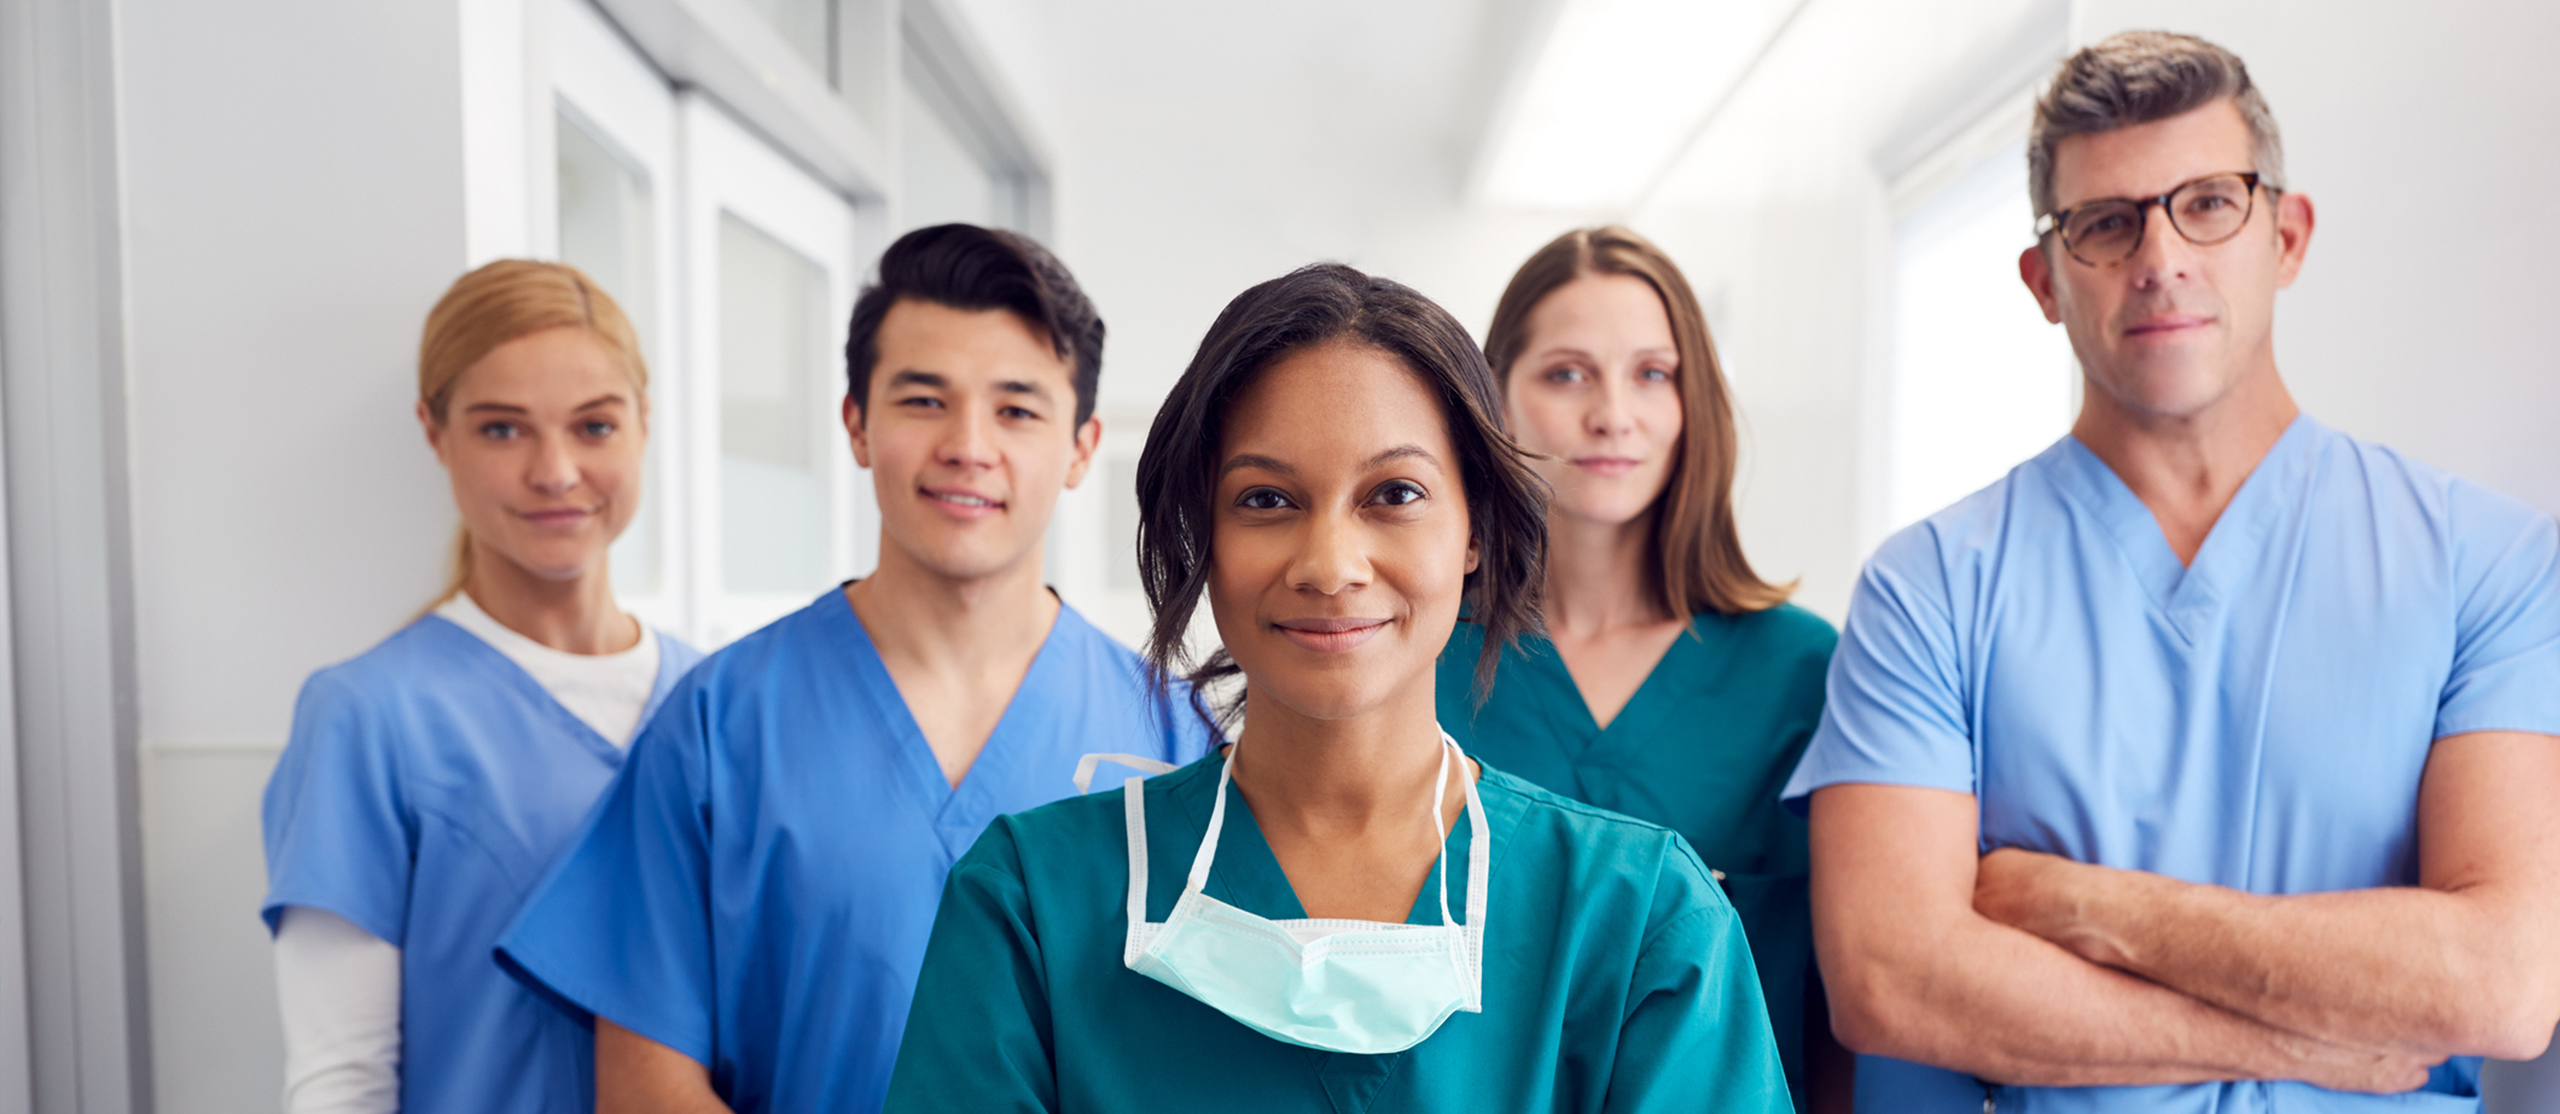 Healthcare professionals standing together in a medical setting.